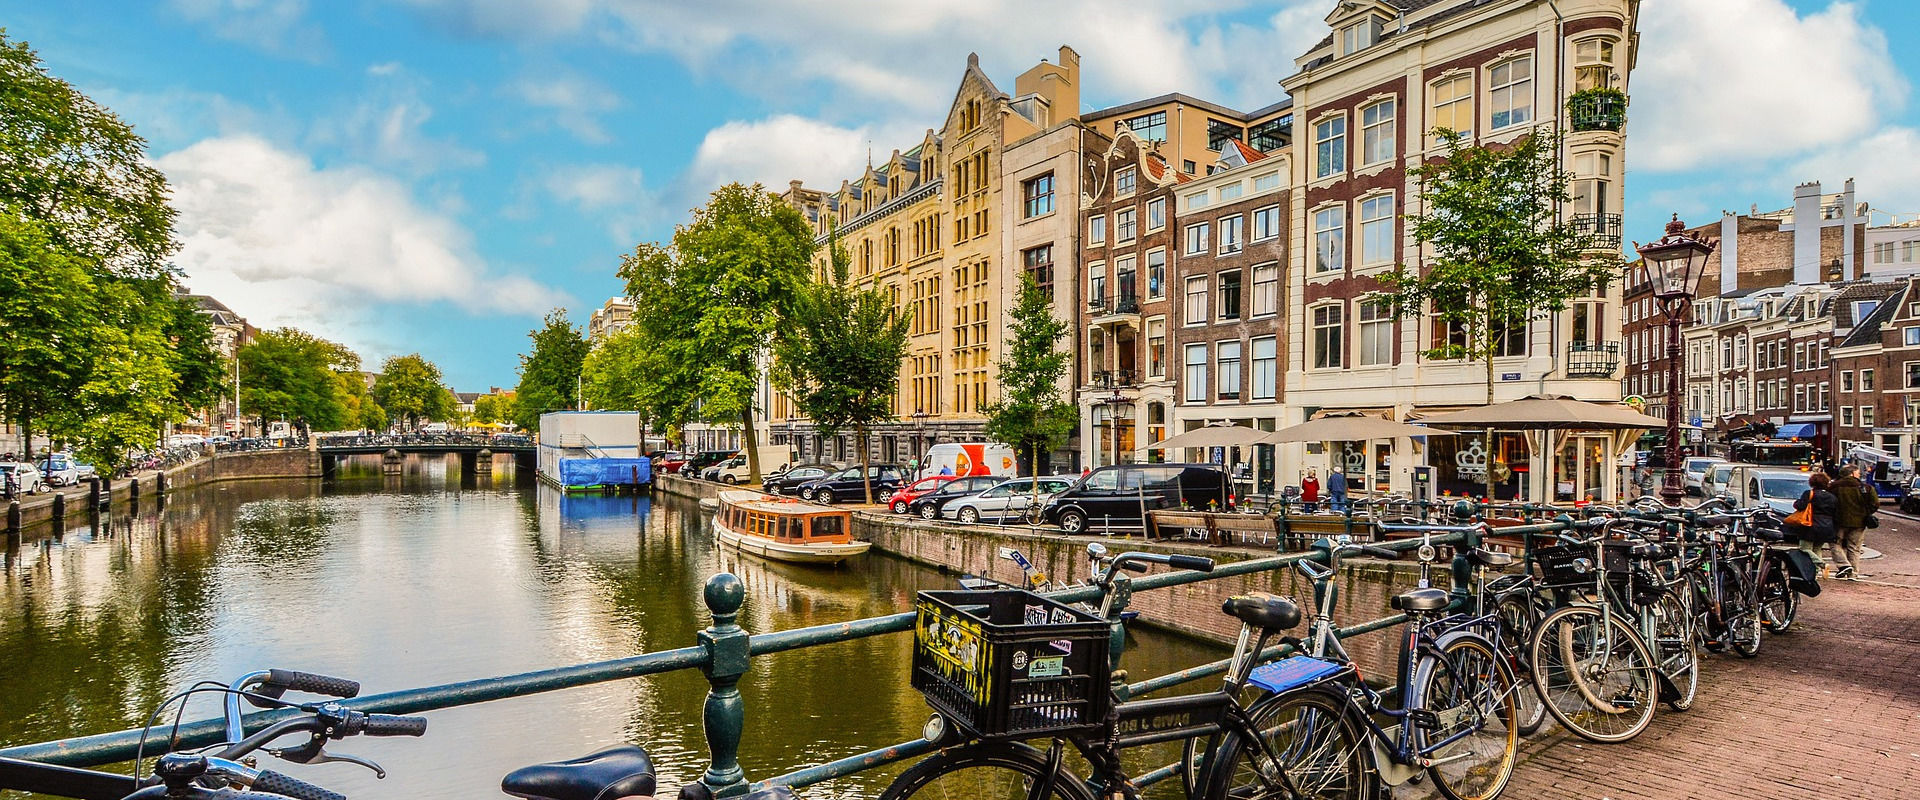 Top Sites You Can Visit In Amsterdam Tourist Destinations